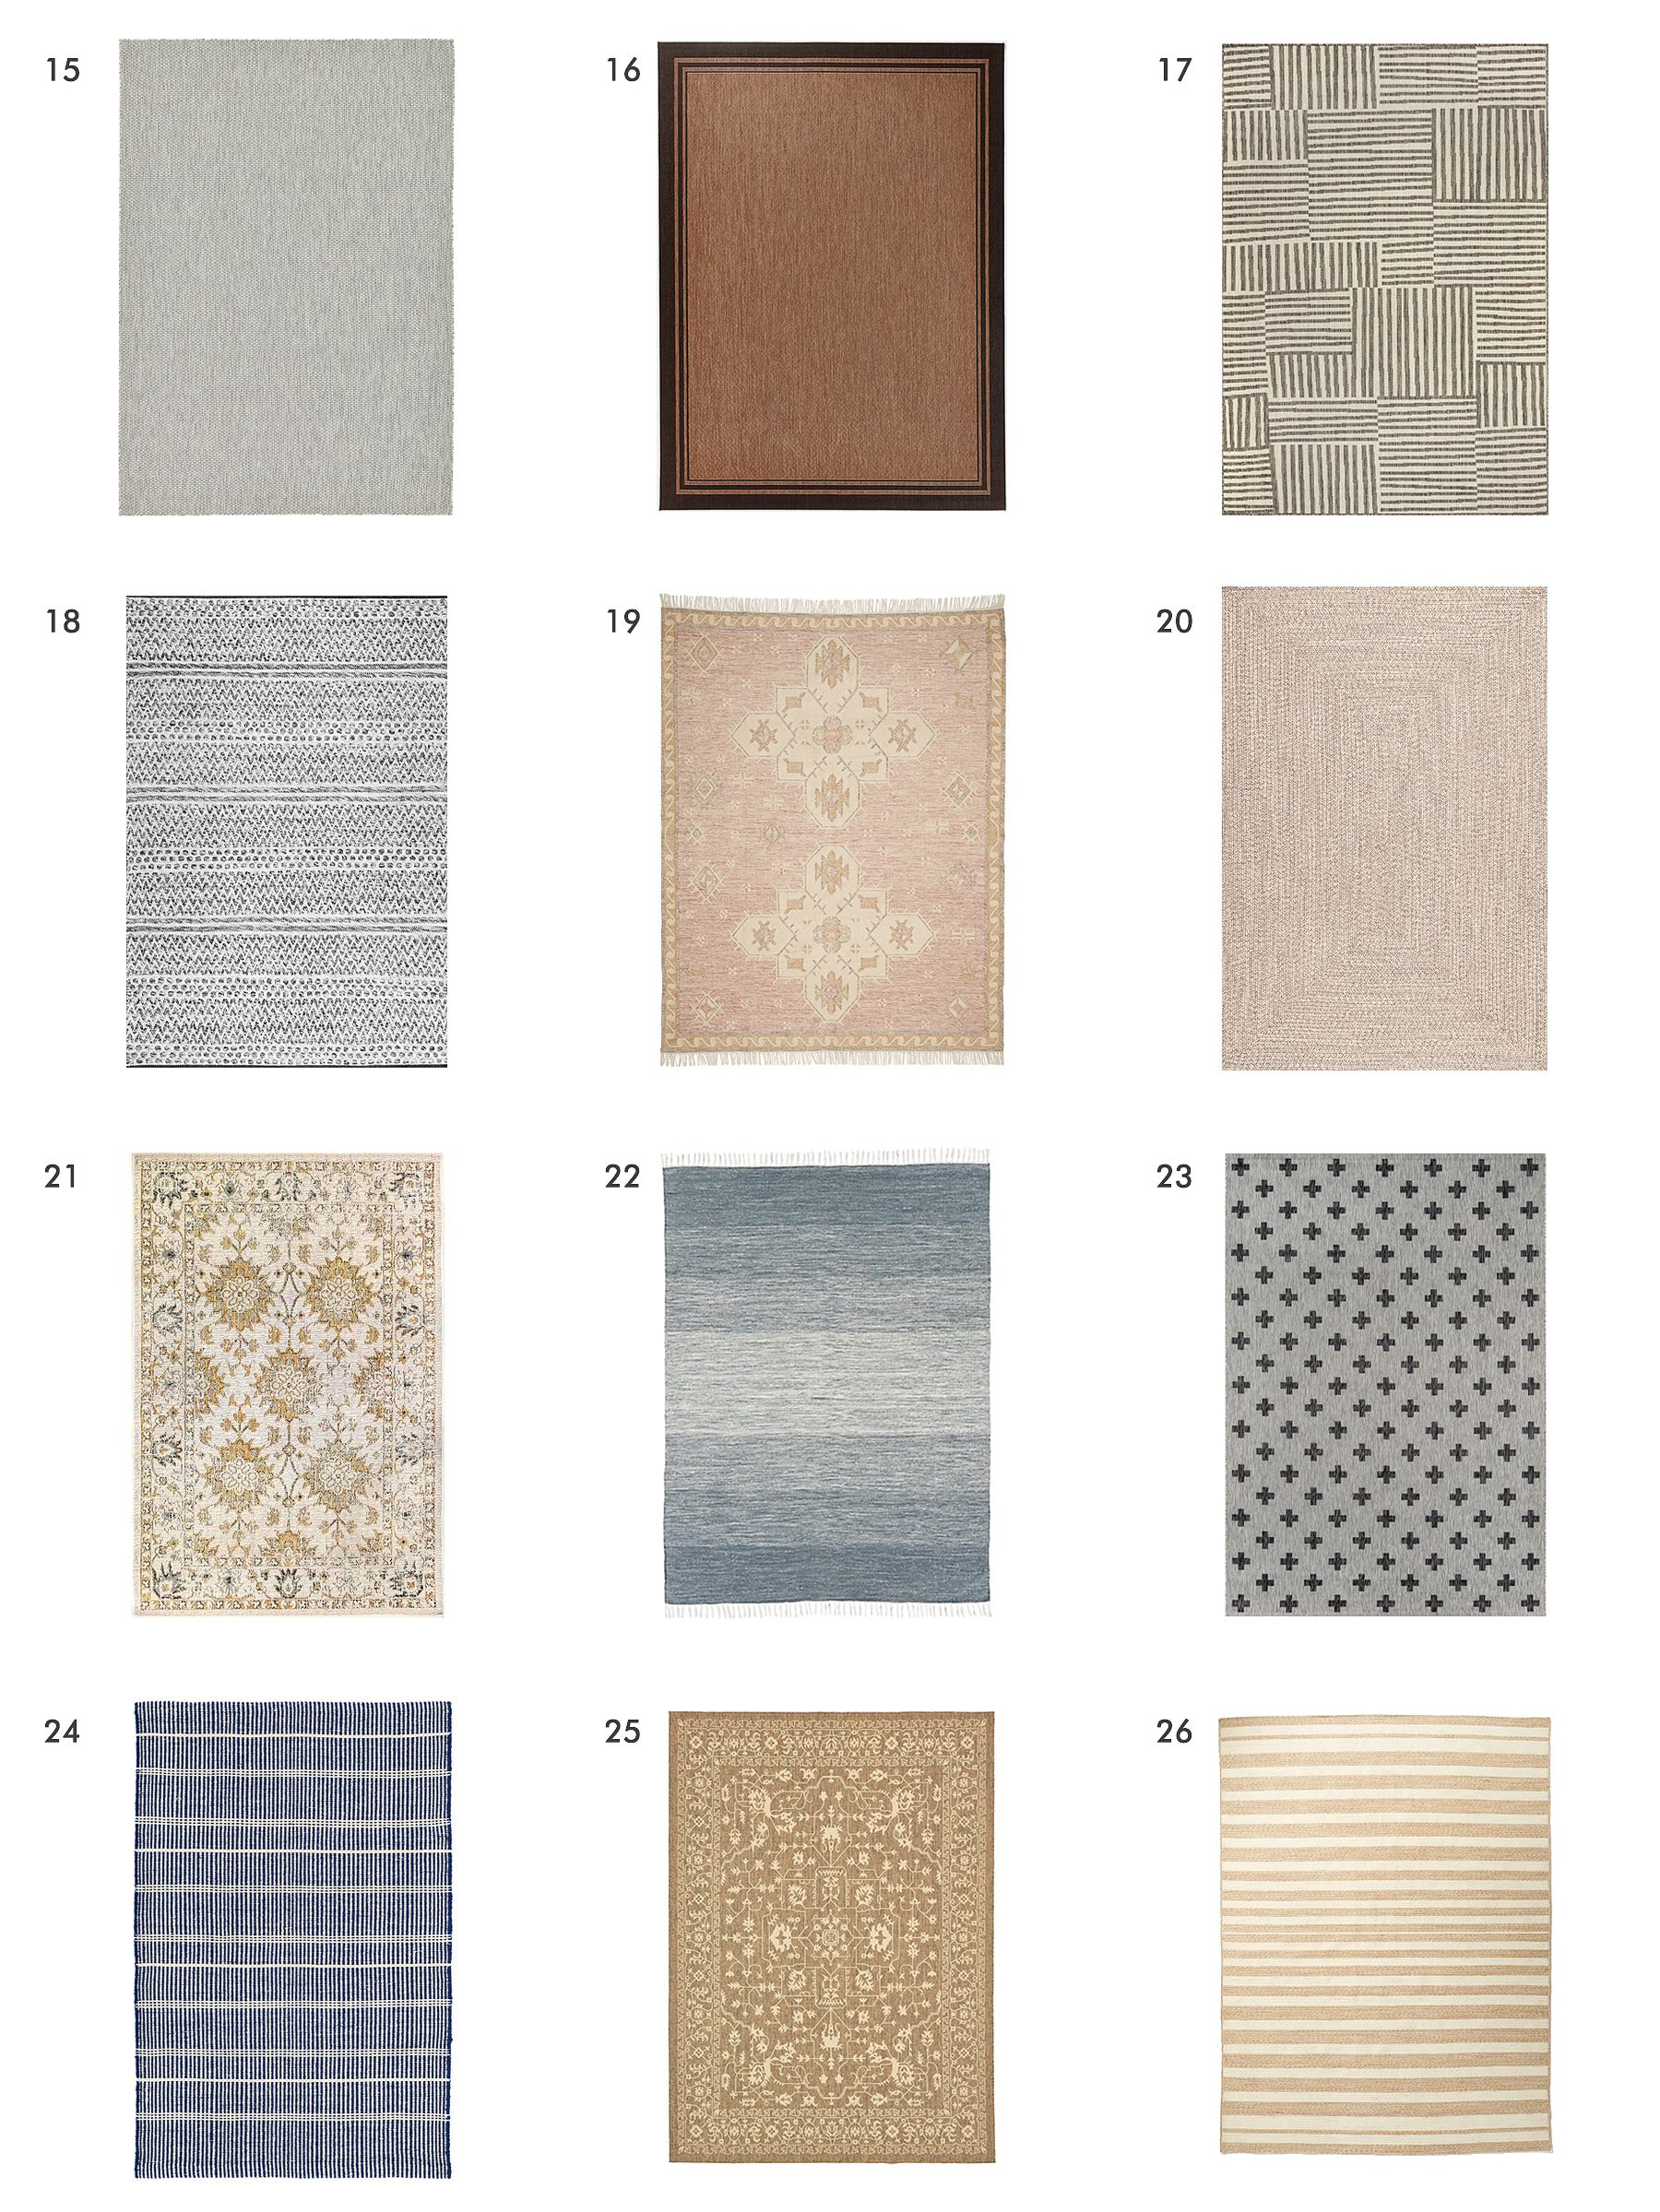 A grid of many outdoor rug options // via yellow brick home